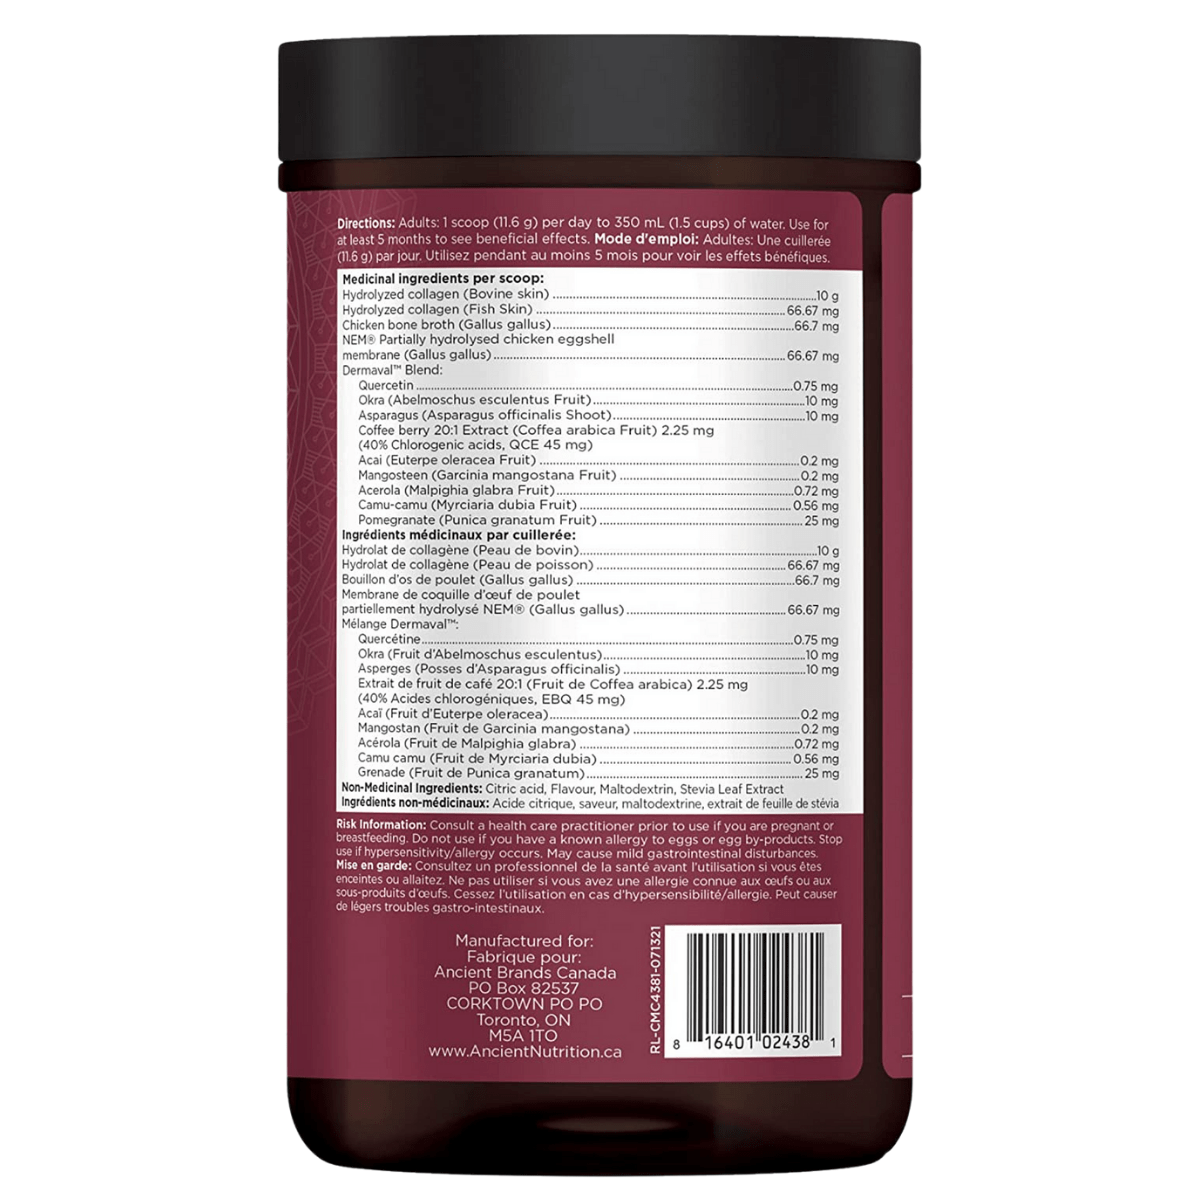 Ancient Nutrition Multi Collagen Protein Beauty Within Guava Passionfruit, 232g Benefits